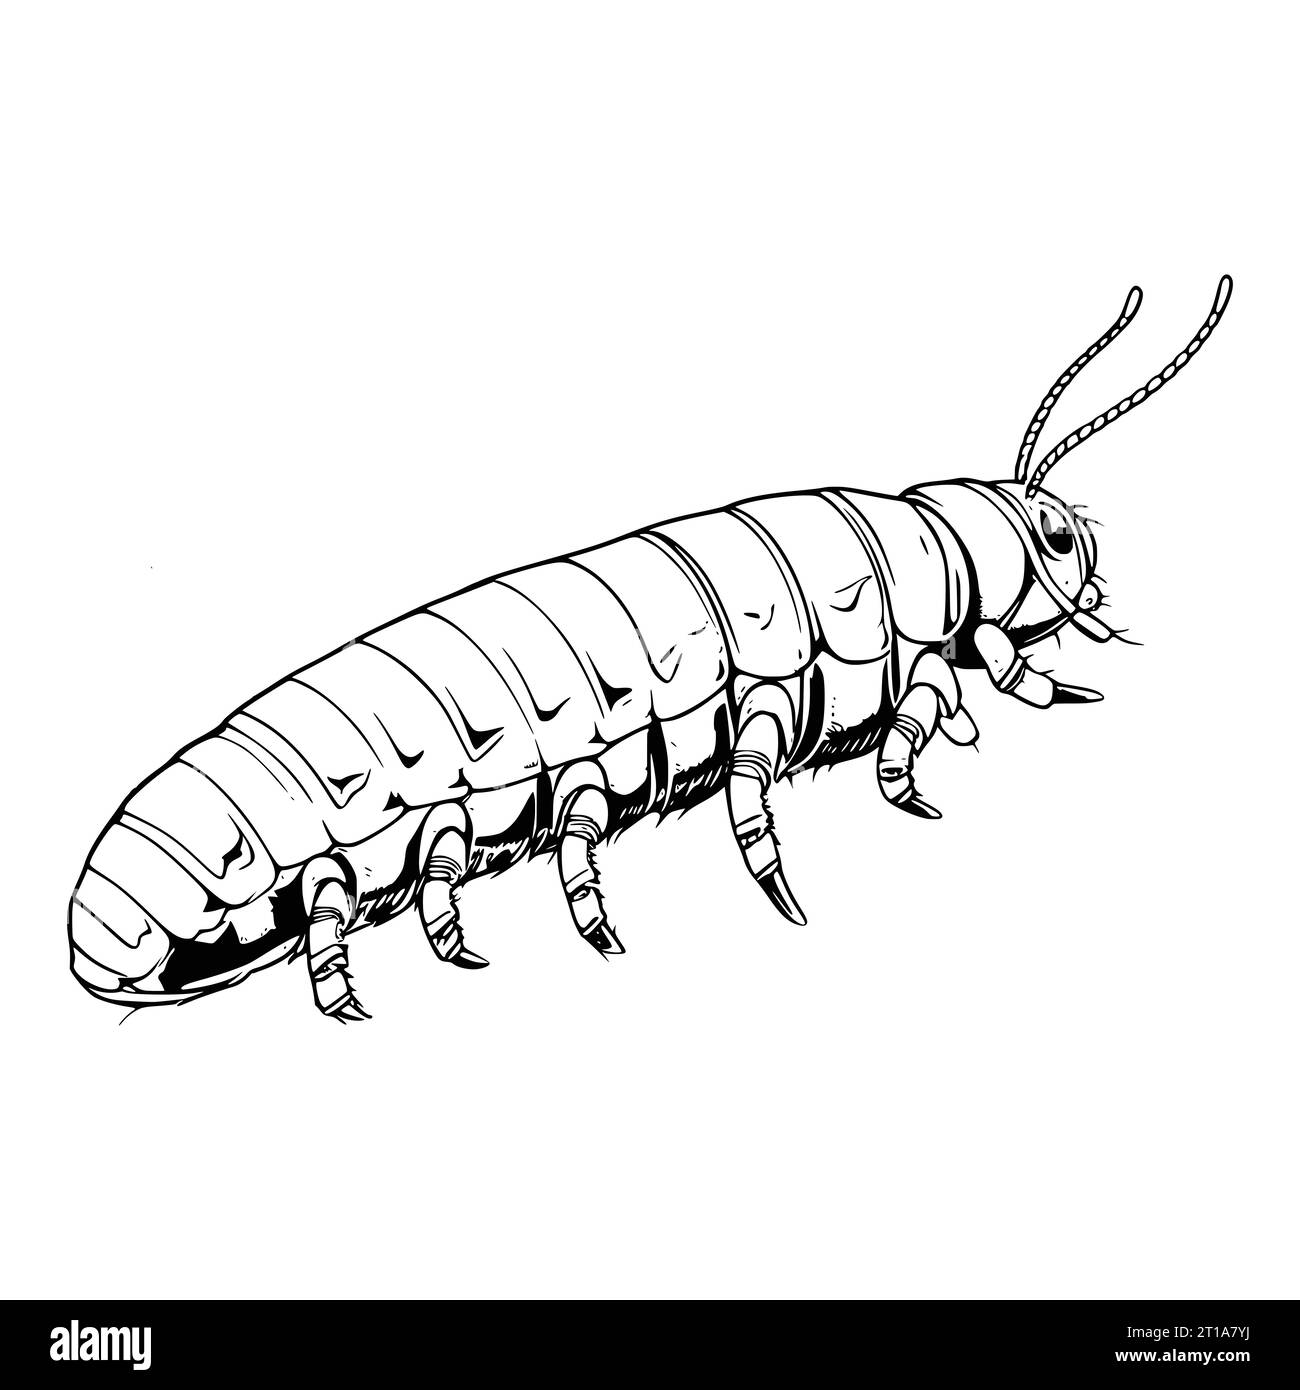 Armyworm Coloring Page for Kids Stock Vector